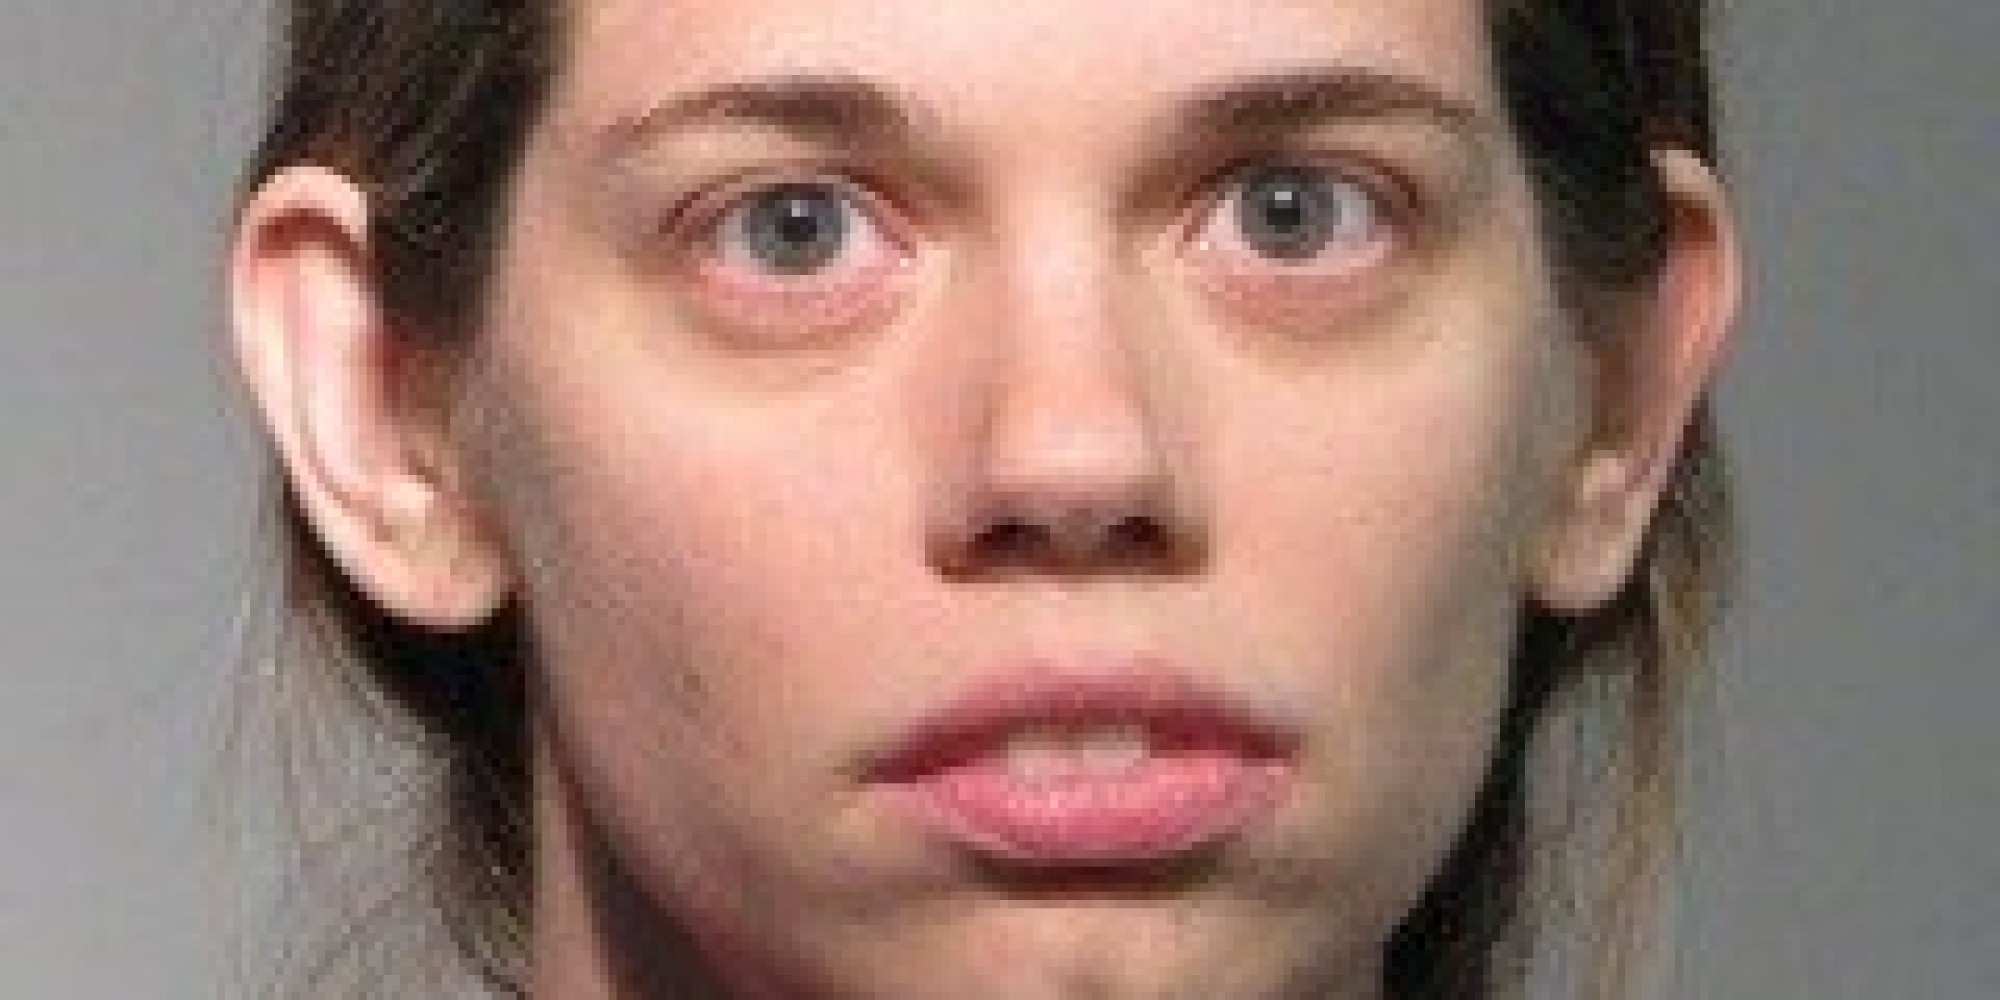 Father Daughter Porn Real Footage - Sarah Adleta Sentenced To 54 Years For Making Child Porn ...